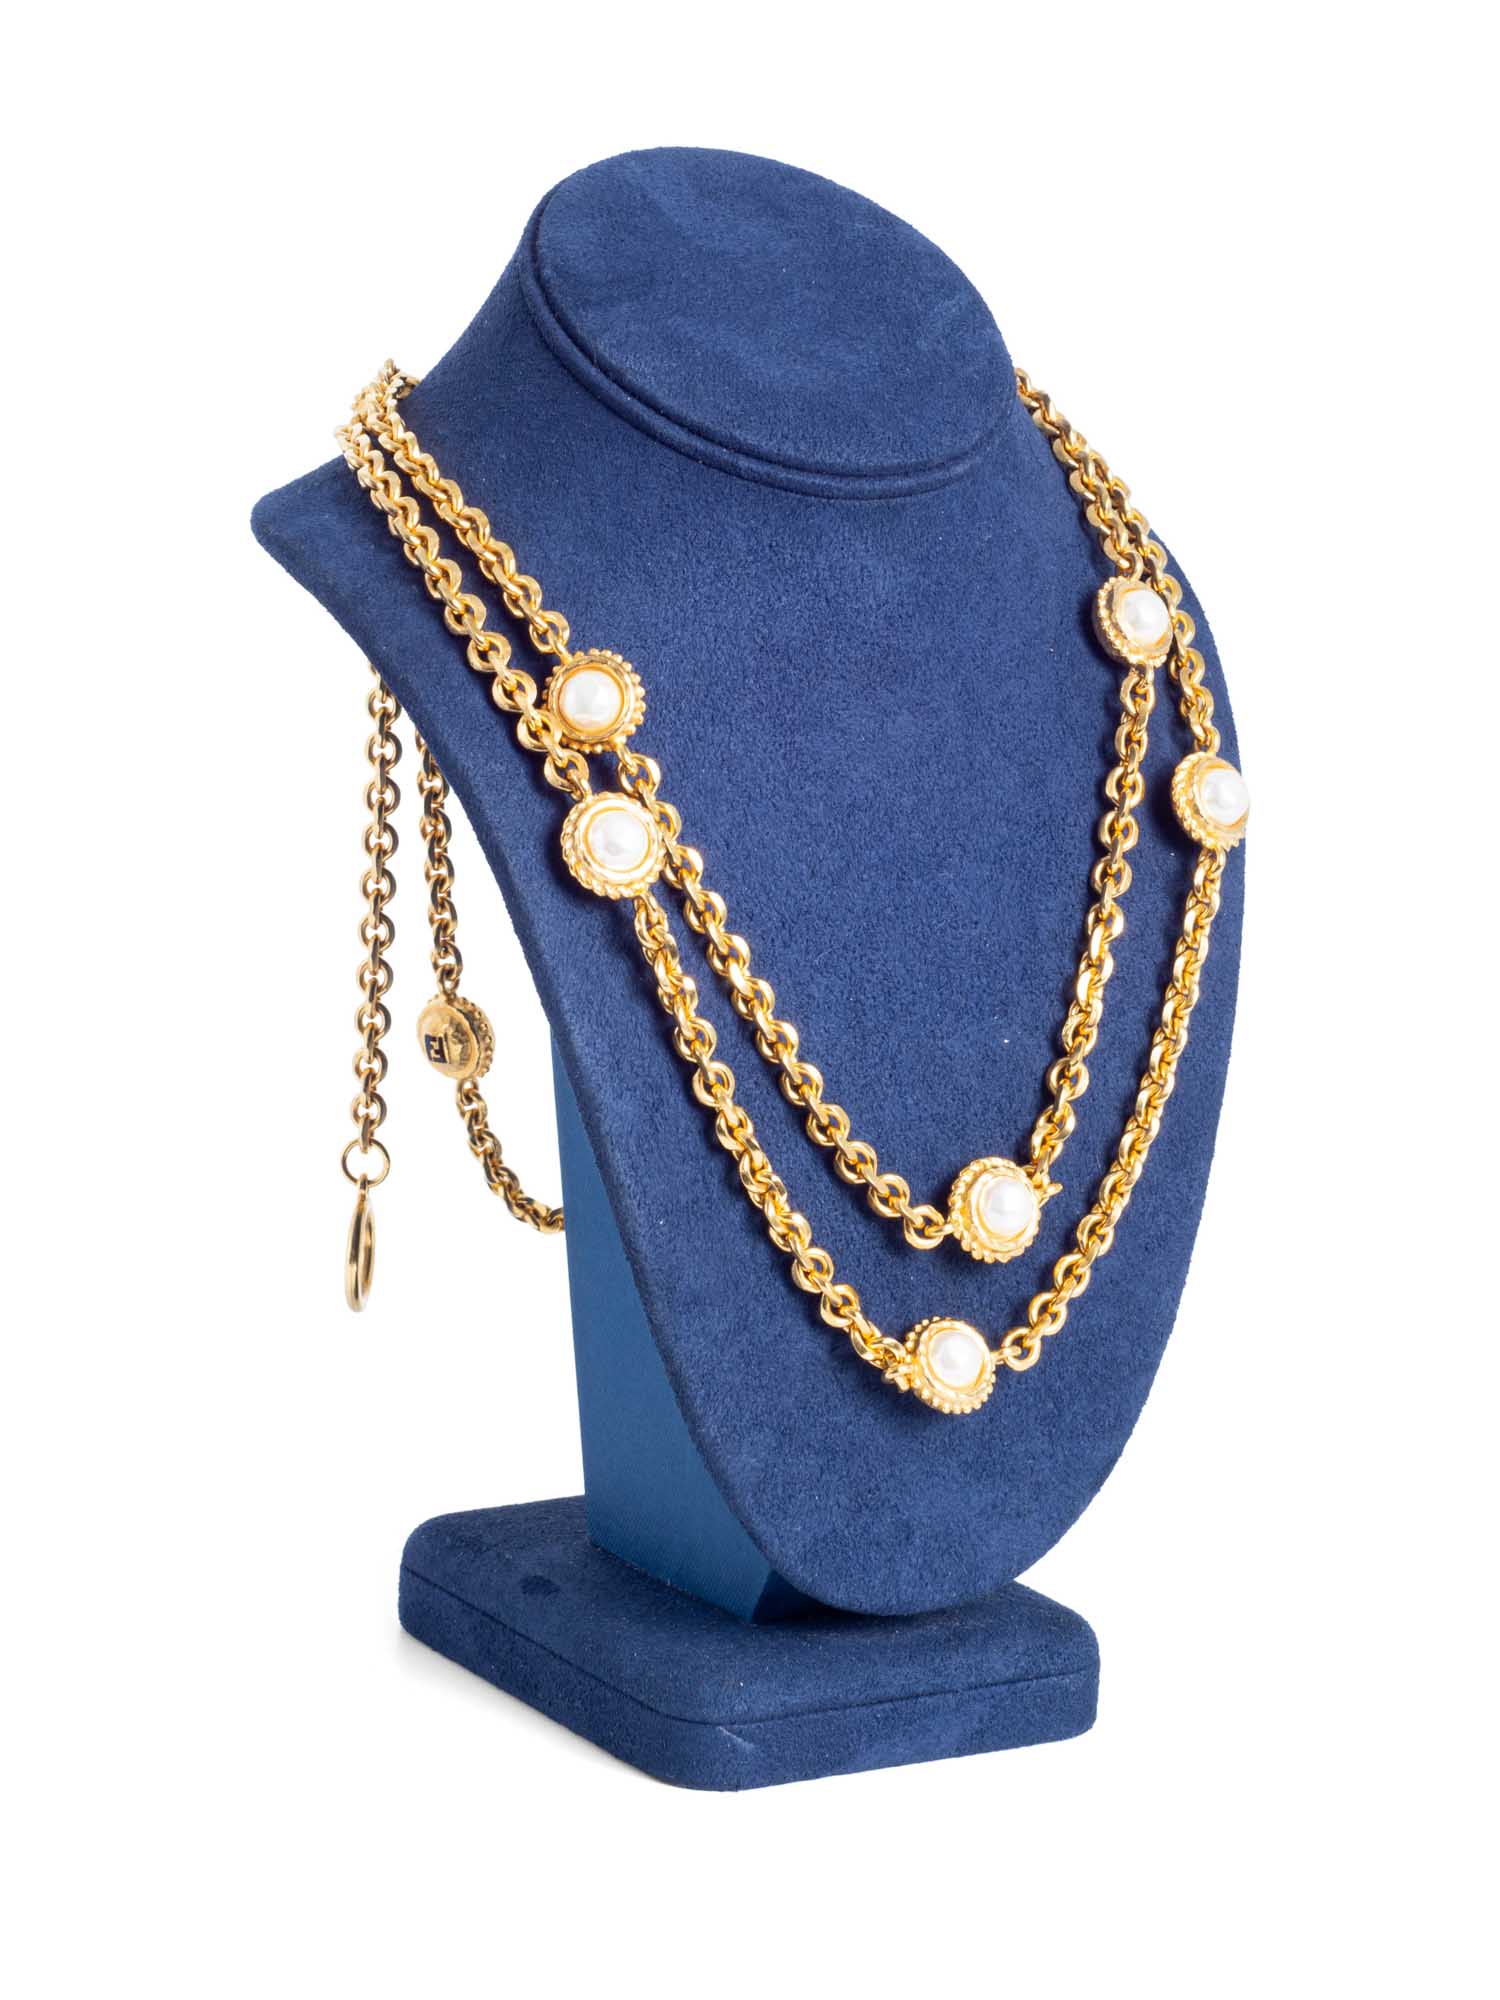 Chanel Explores Tweed in New High Jewelry Collection  WWD